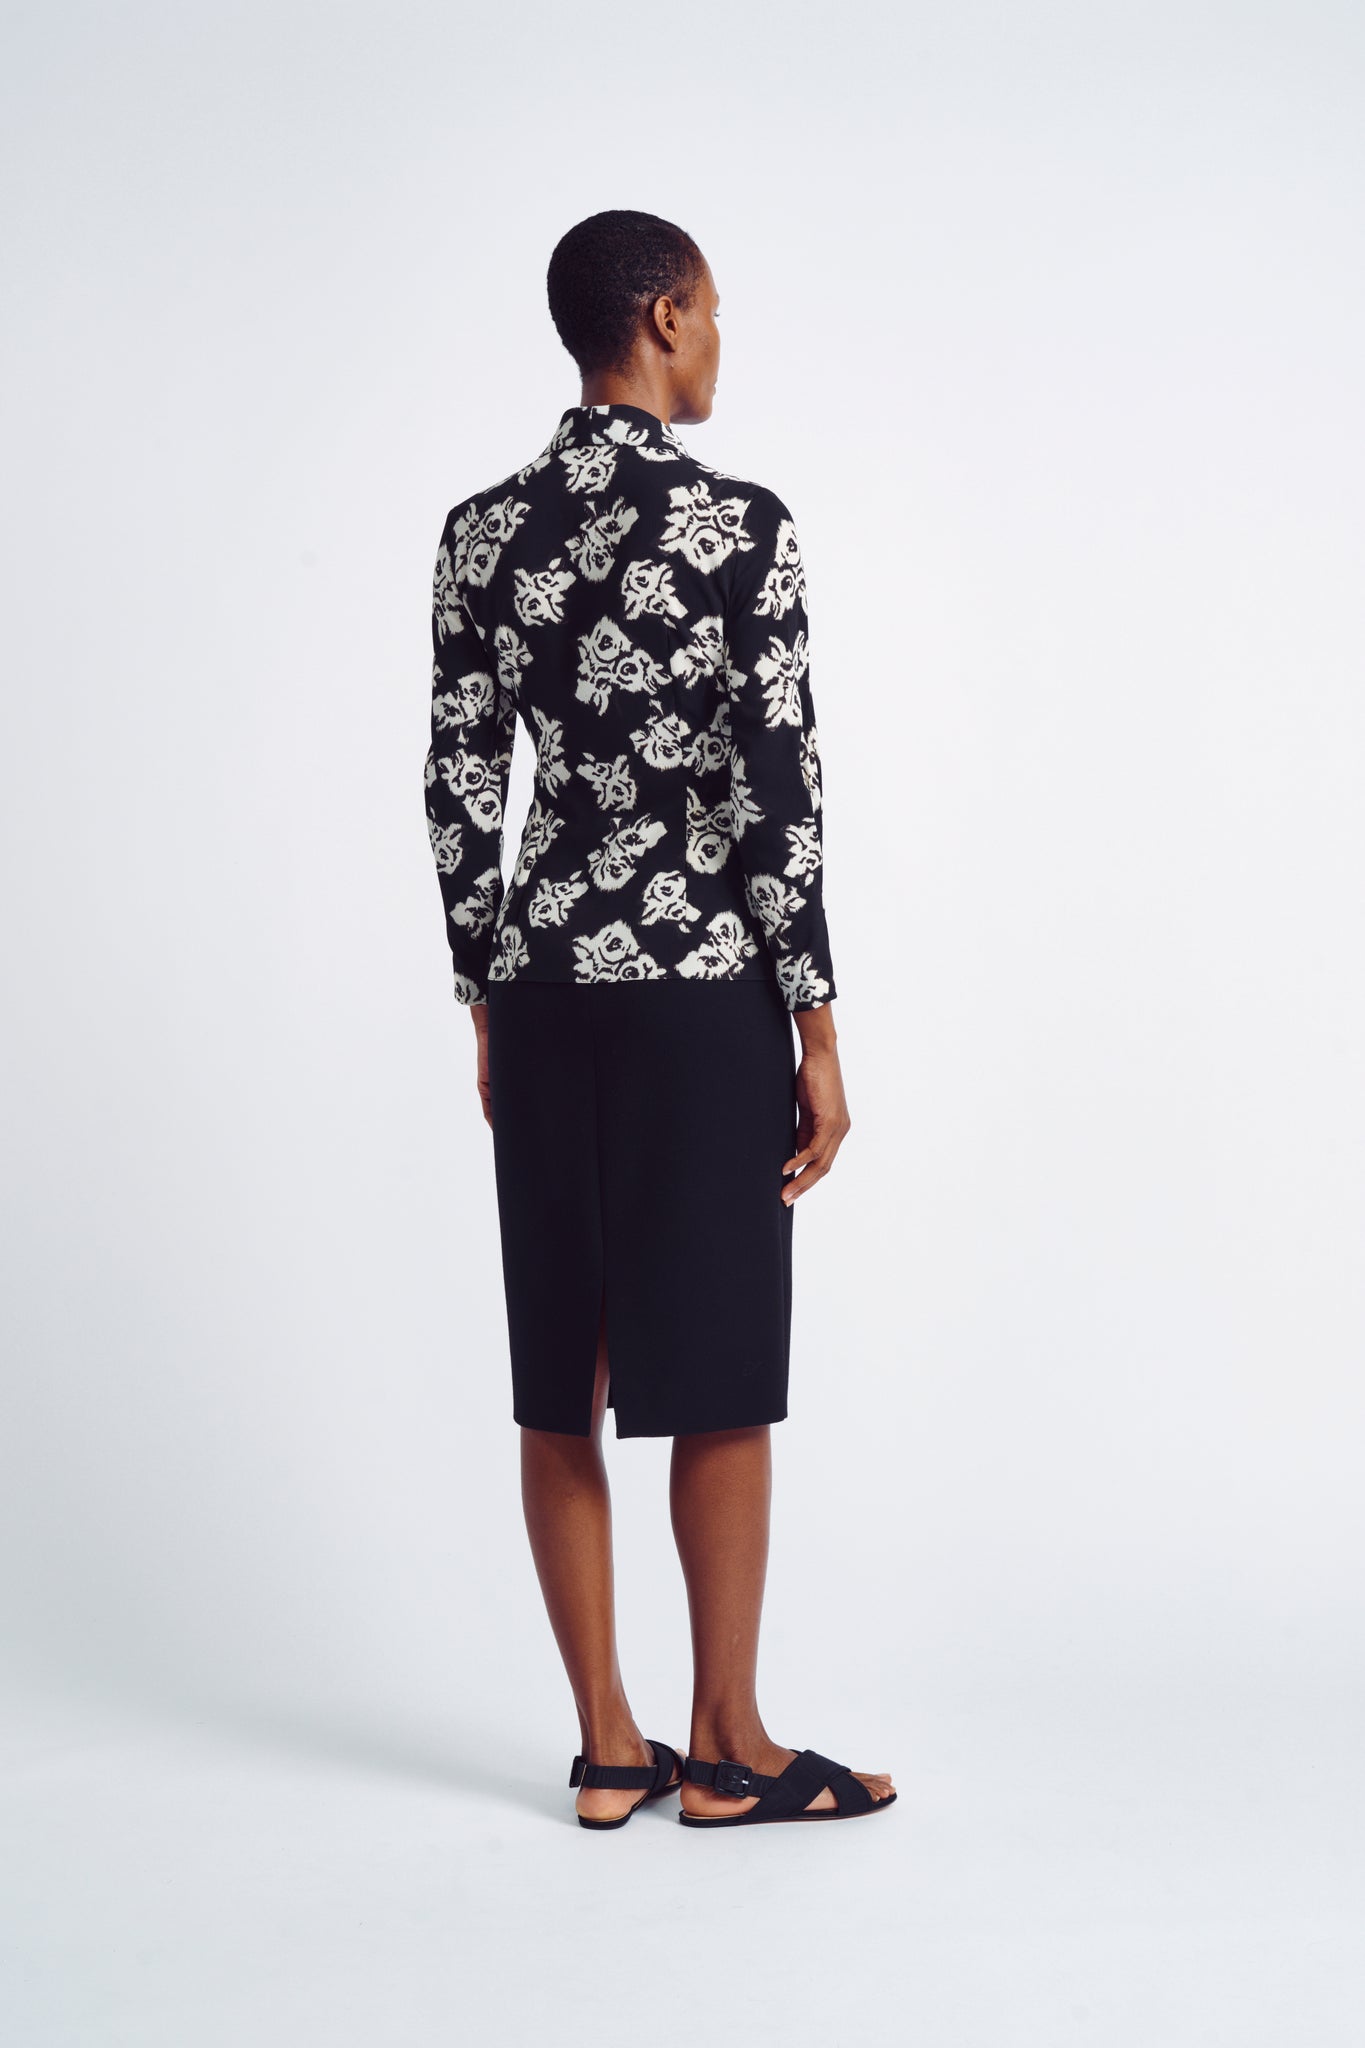 Paulie Top | Black and White Floral Printed Crepe Shirt | Emilia Wickstead